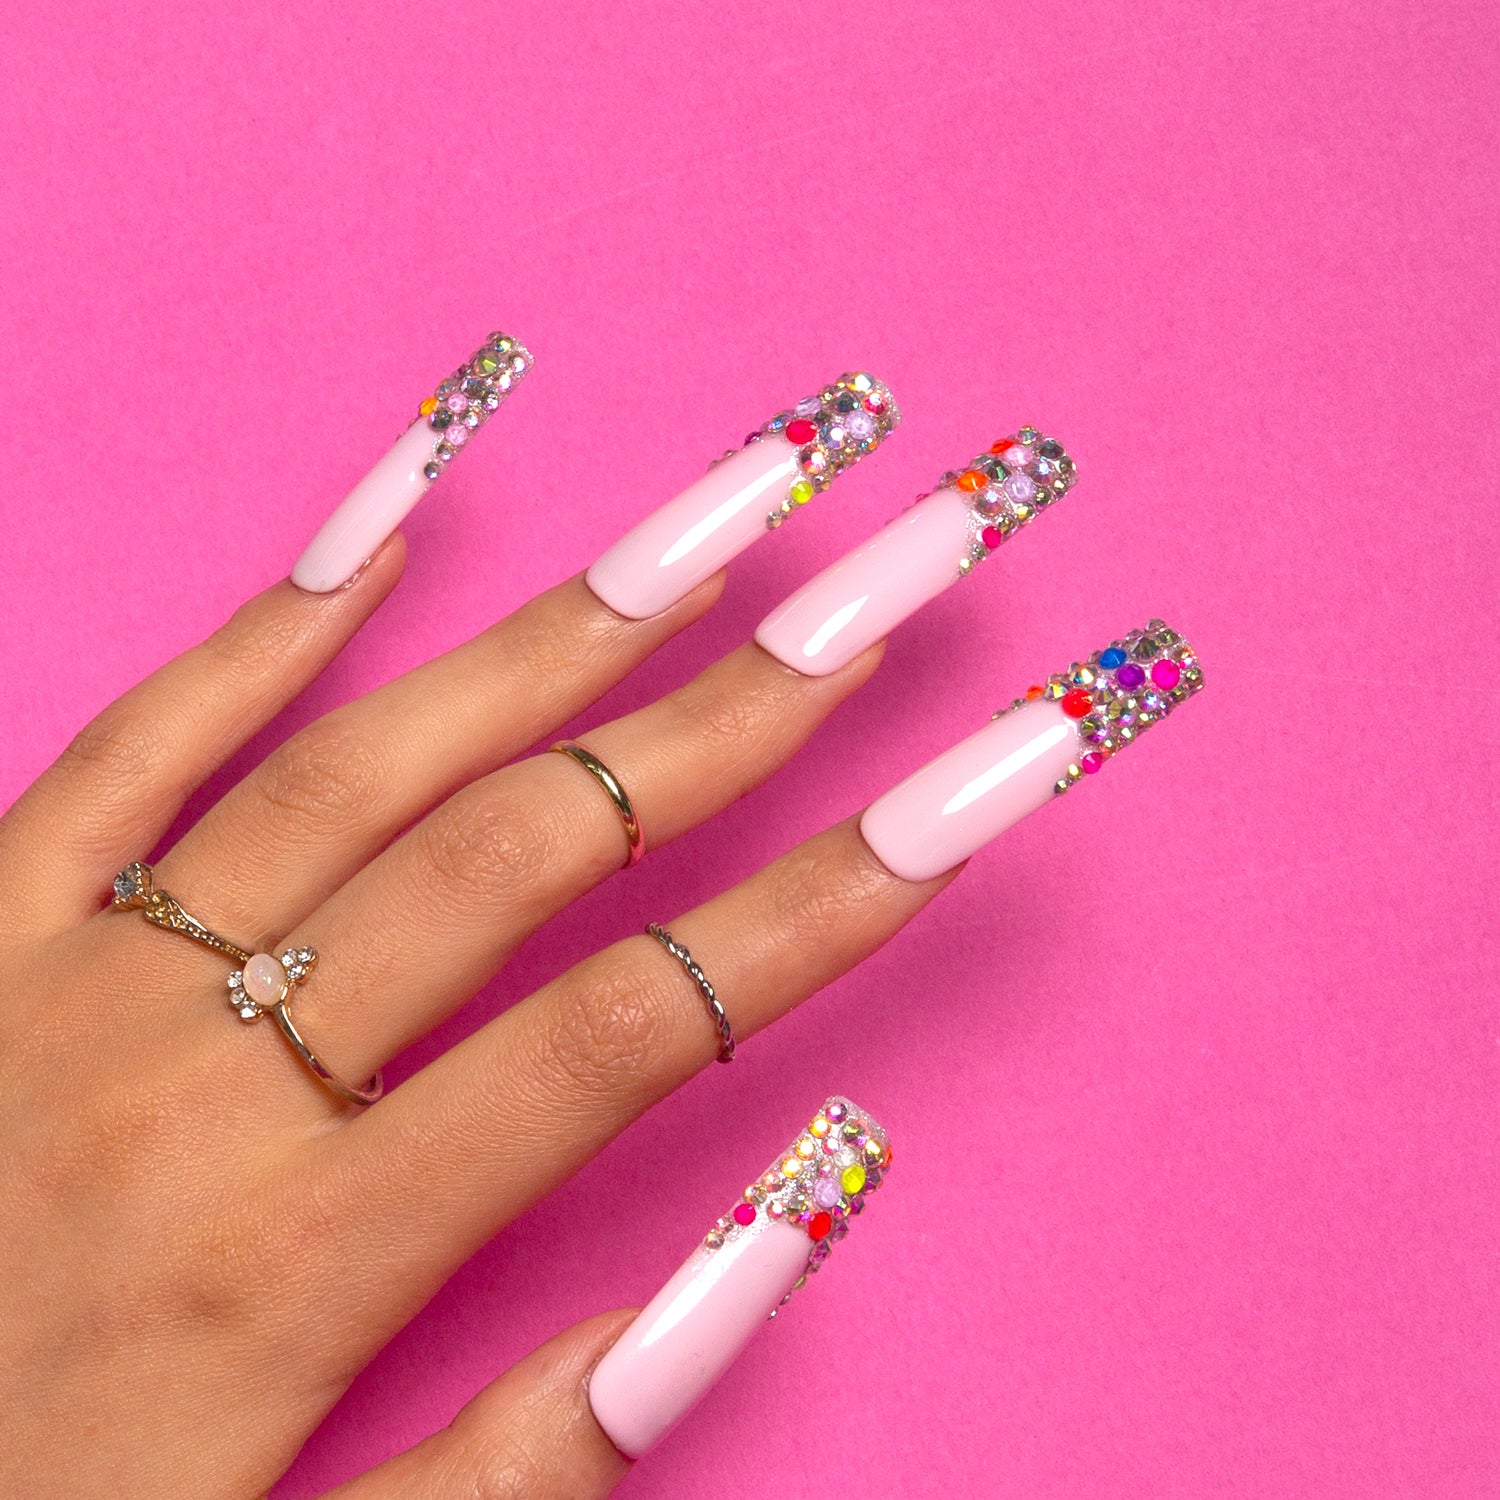 Hand with Jelly Bean Press-On Nails showcasing nude base with colorful, sugary bean accents on tips against pink background, wearing multiple rings